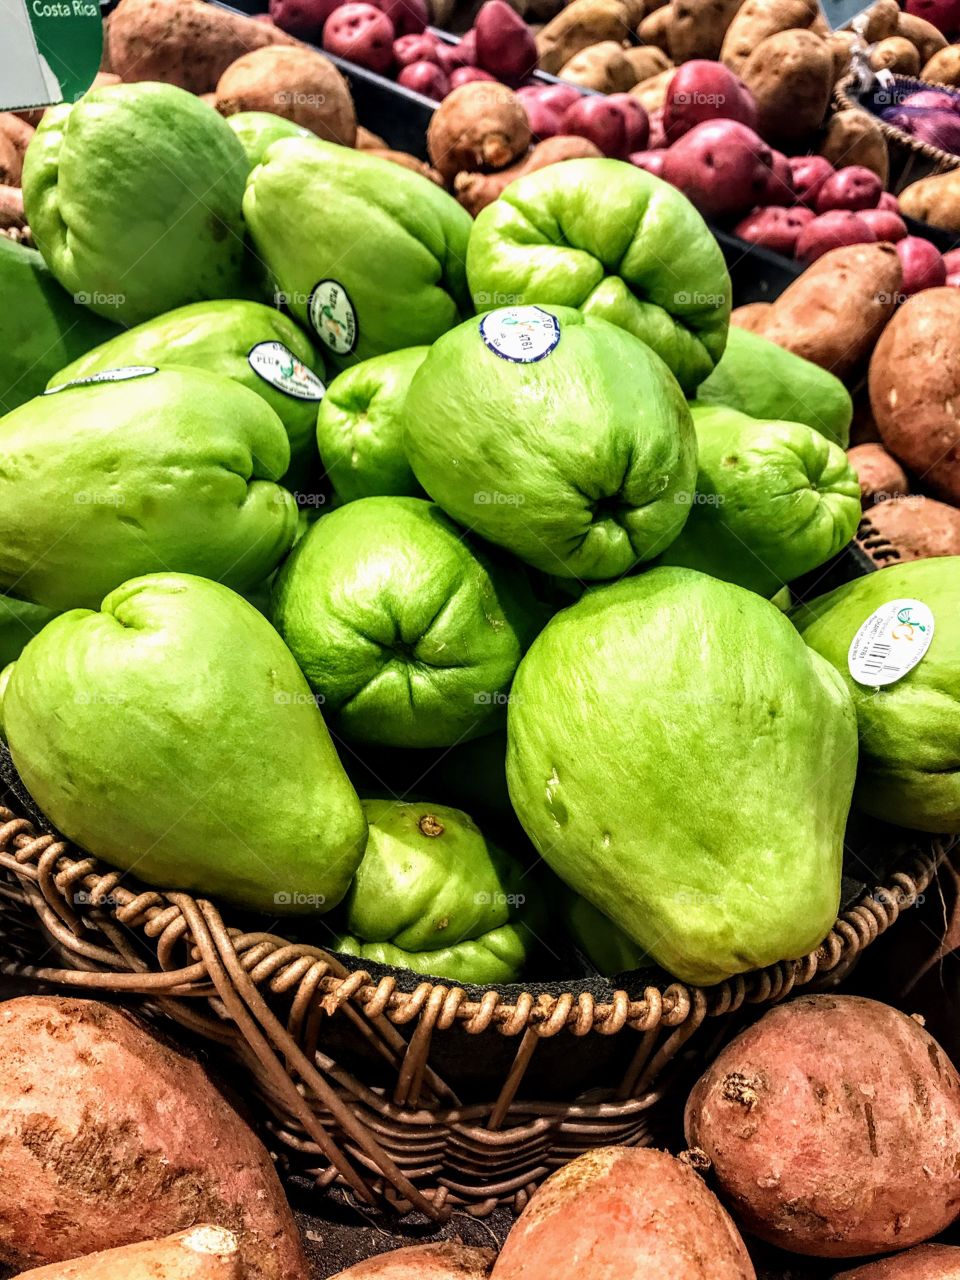 Chayote is a open knowing all over latino-american